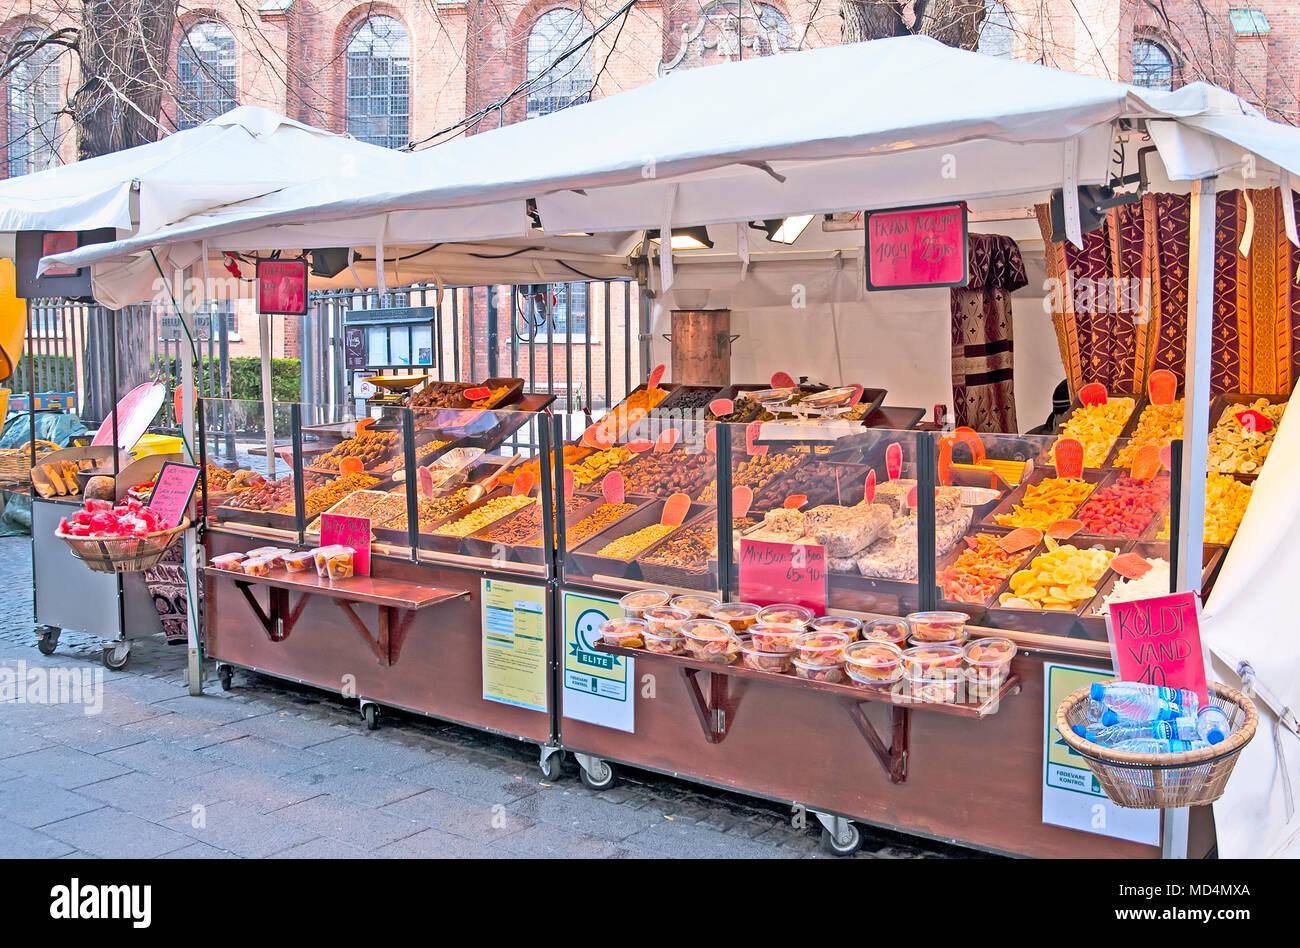 COPENHAGEN, DENMARK - APRIL 13, 2010: Shop with dried fruits, sweets and nuts in the center of the city. Stock Photo